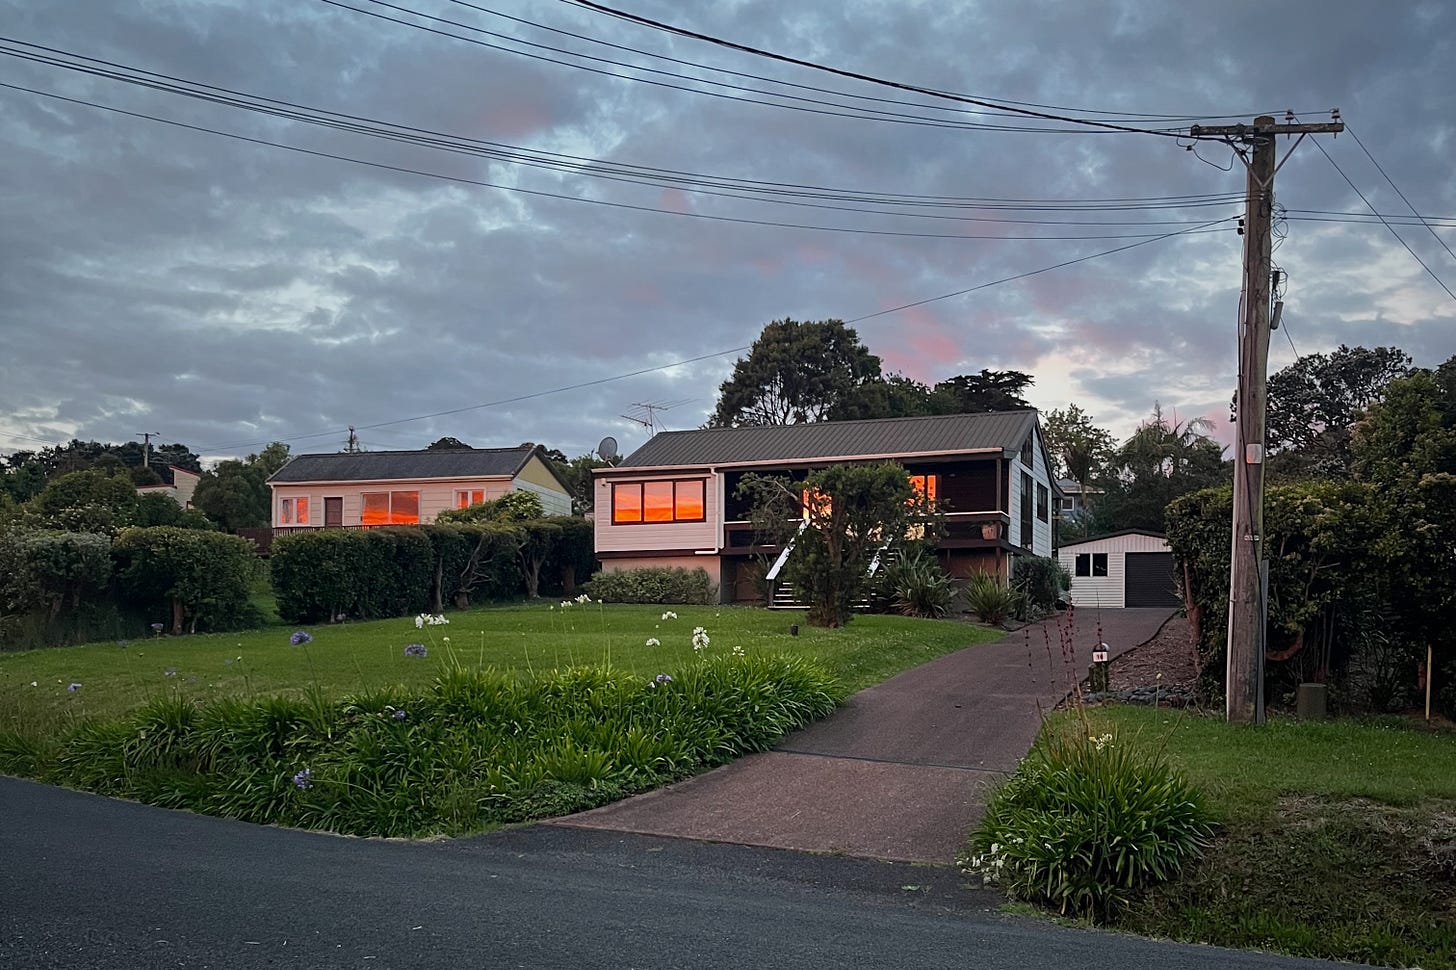 the sun is setting and the red light is reflected in the windows of a 1980s New Zealand house set off a road on a sloping lawn, agapanthus plants at the verge